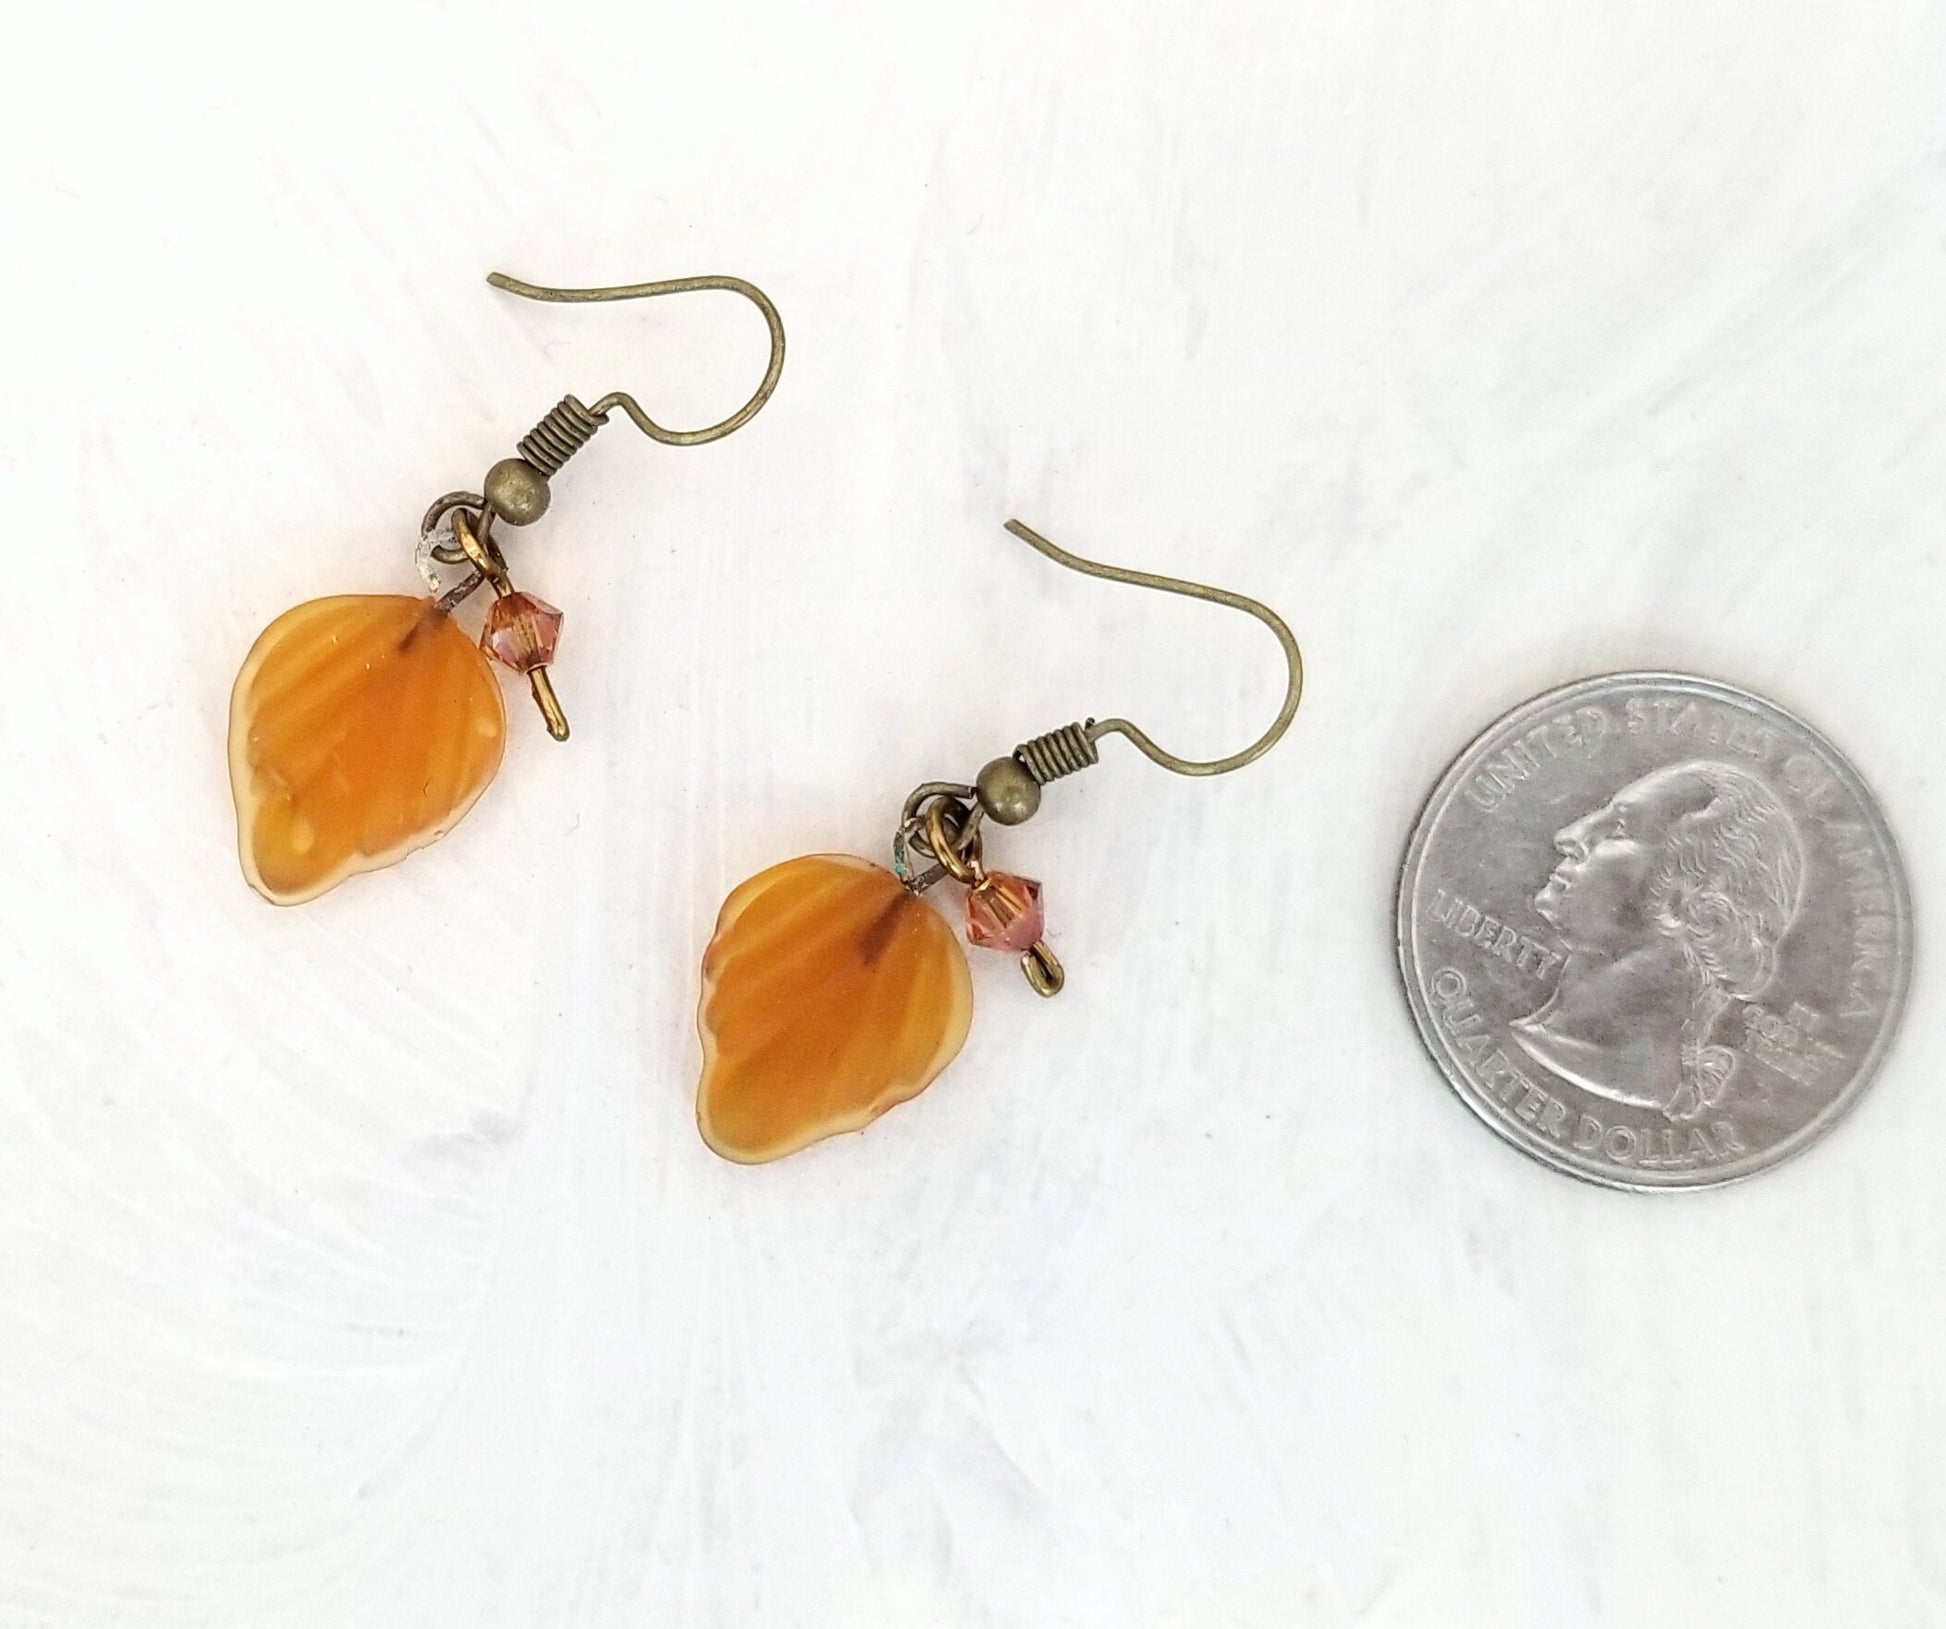 Small Glass Leaf Earrings in Frosted Light Brown, Wedding, Bridesmaid, Art Nouveau, Renaissance, Forest, Choice of Closure Types